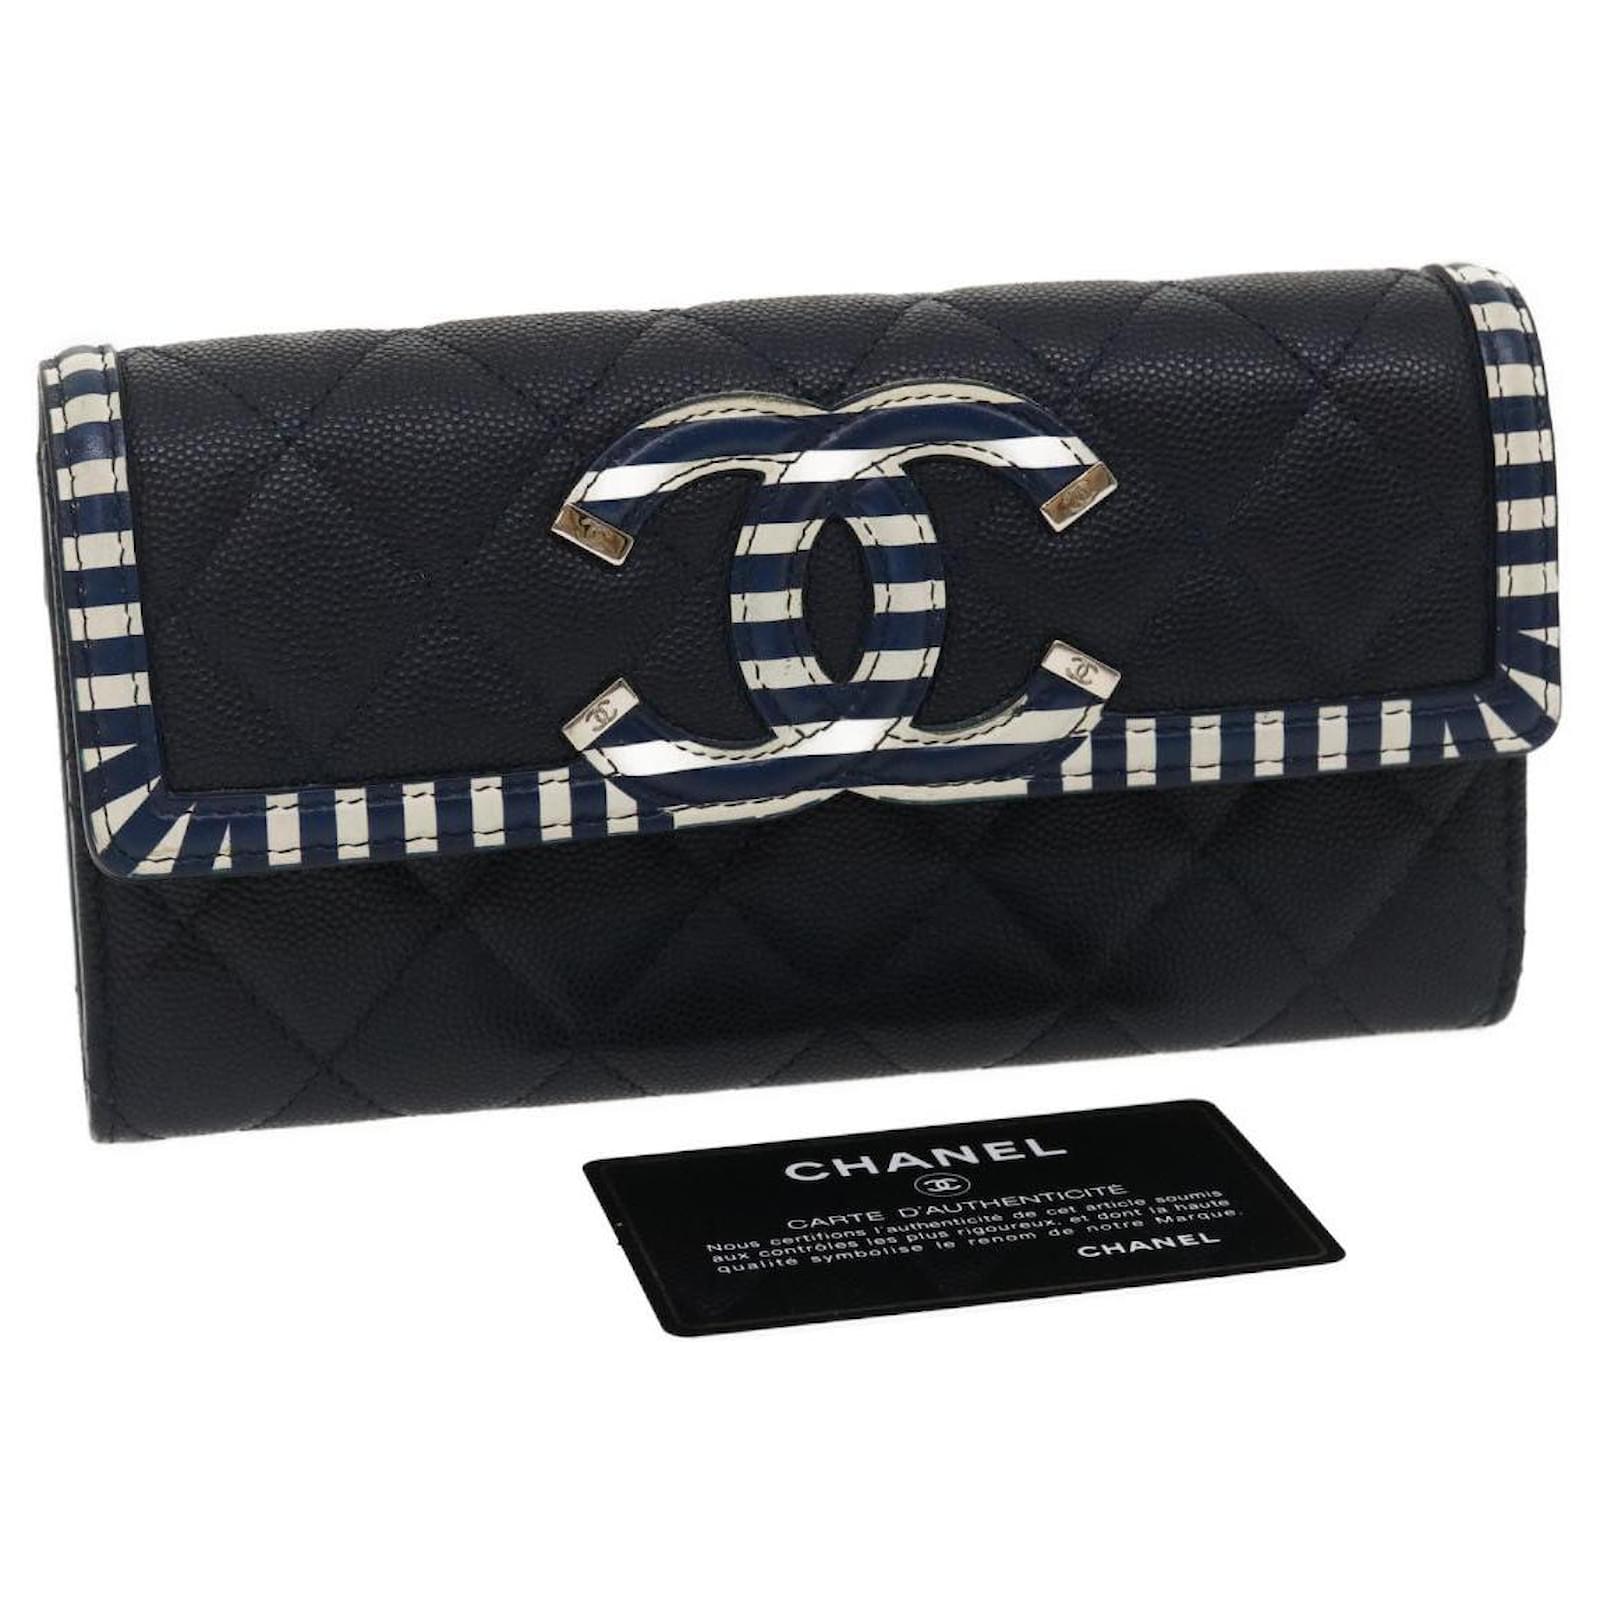 Purses, Wallets, Cases Chanel Chanel Matelasse Cruise Line Long Wallet Caviar Skin Navy CC Auth 29542a